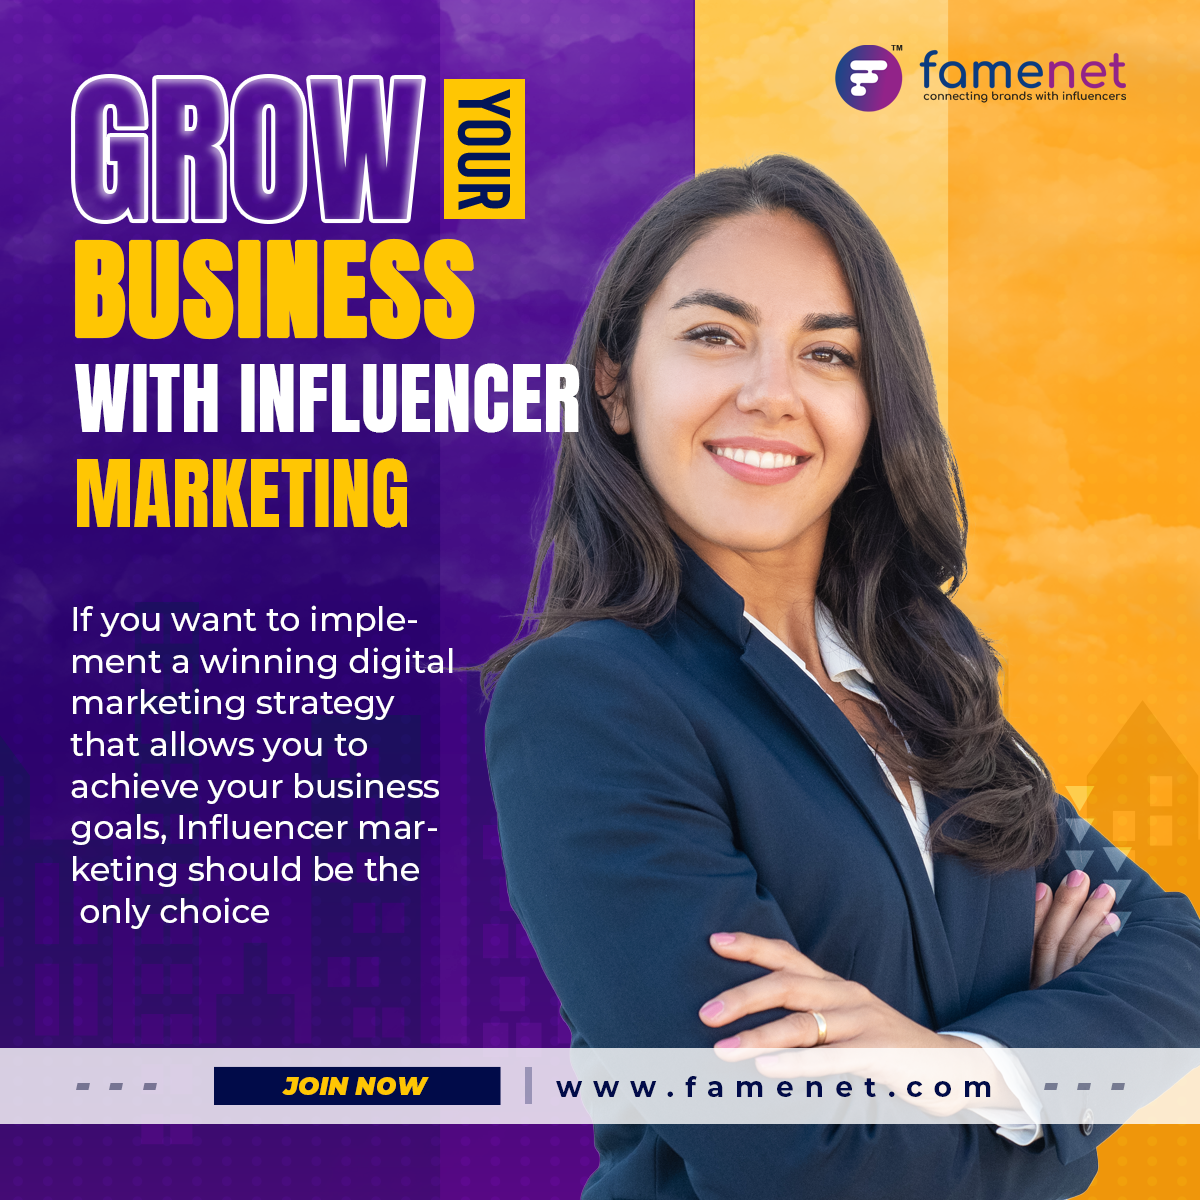 GROW YOUR BUSINESS WITH INFLUENCER MARKETING